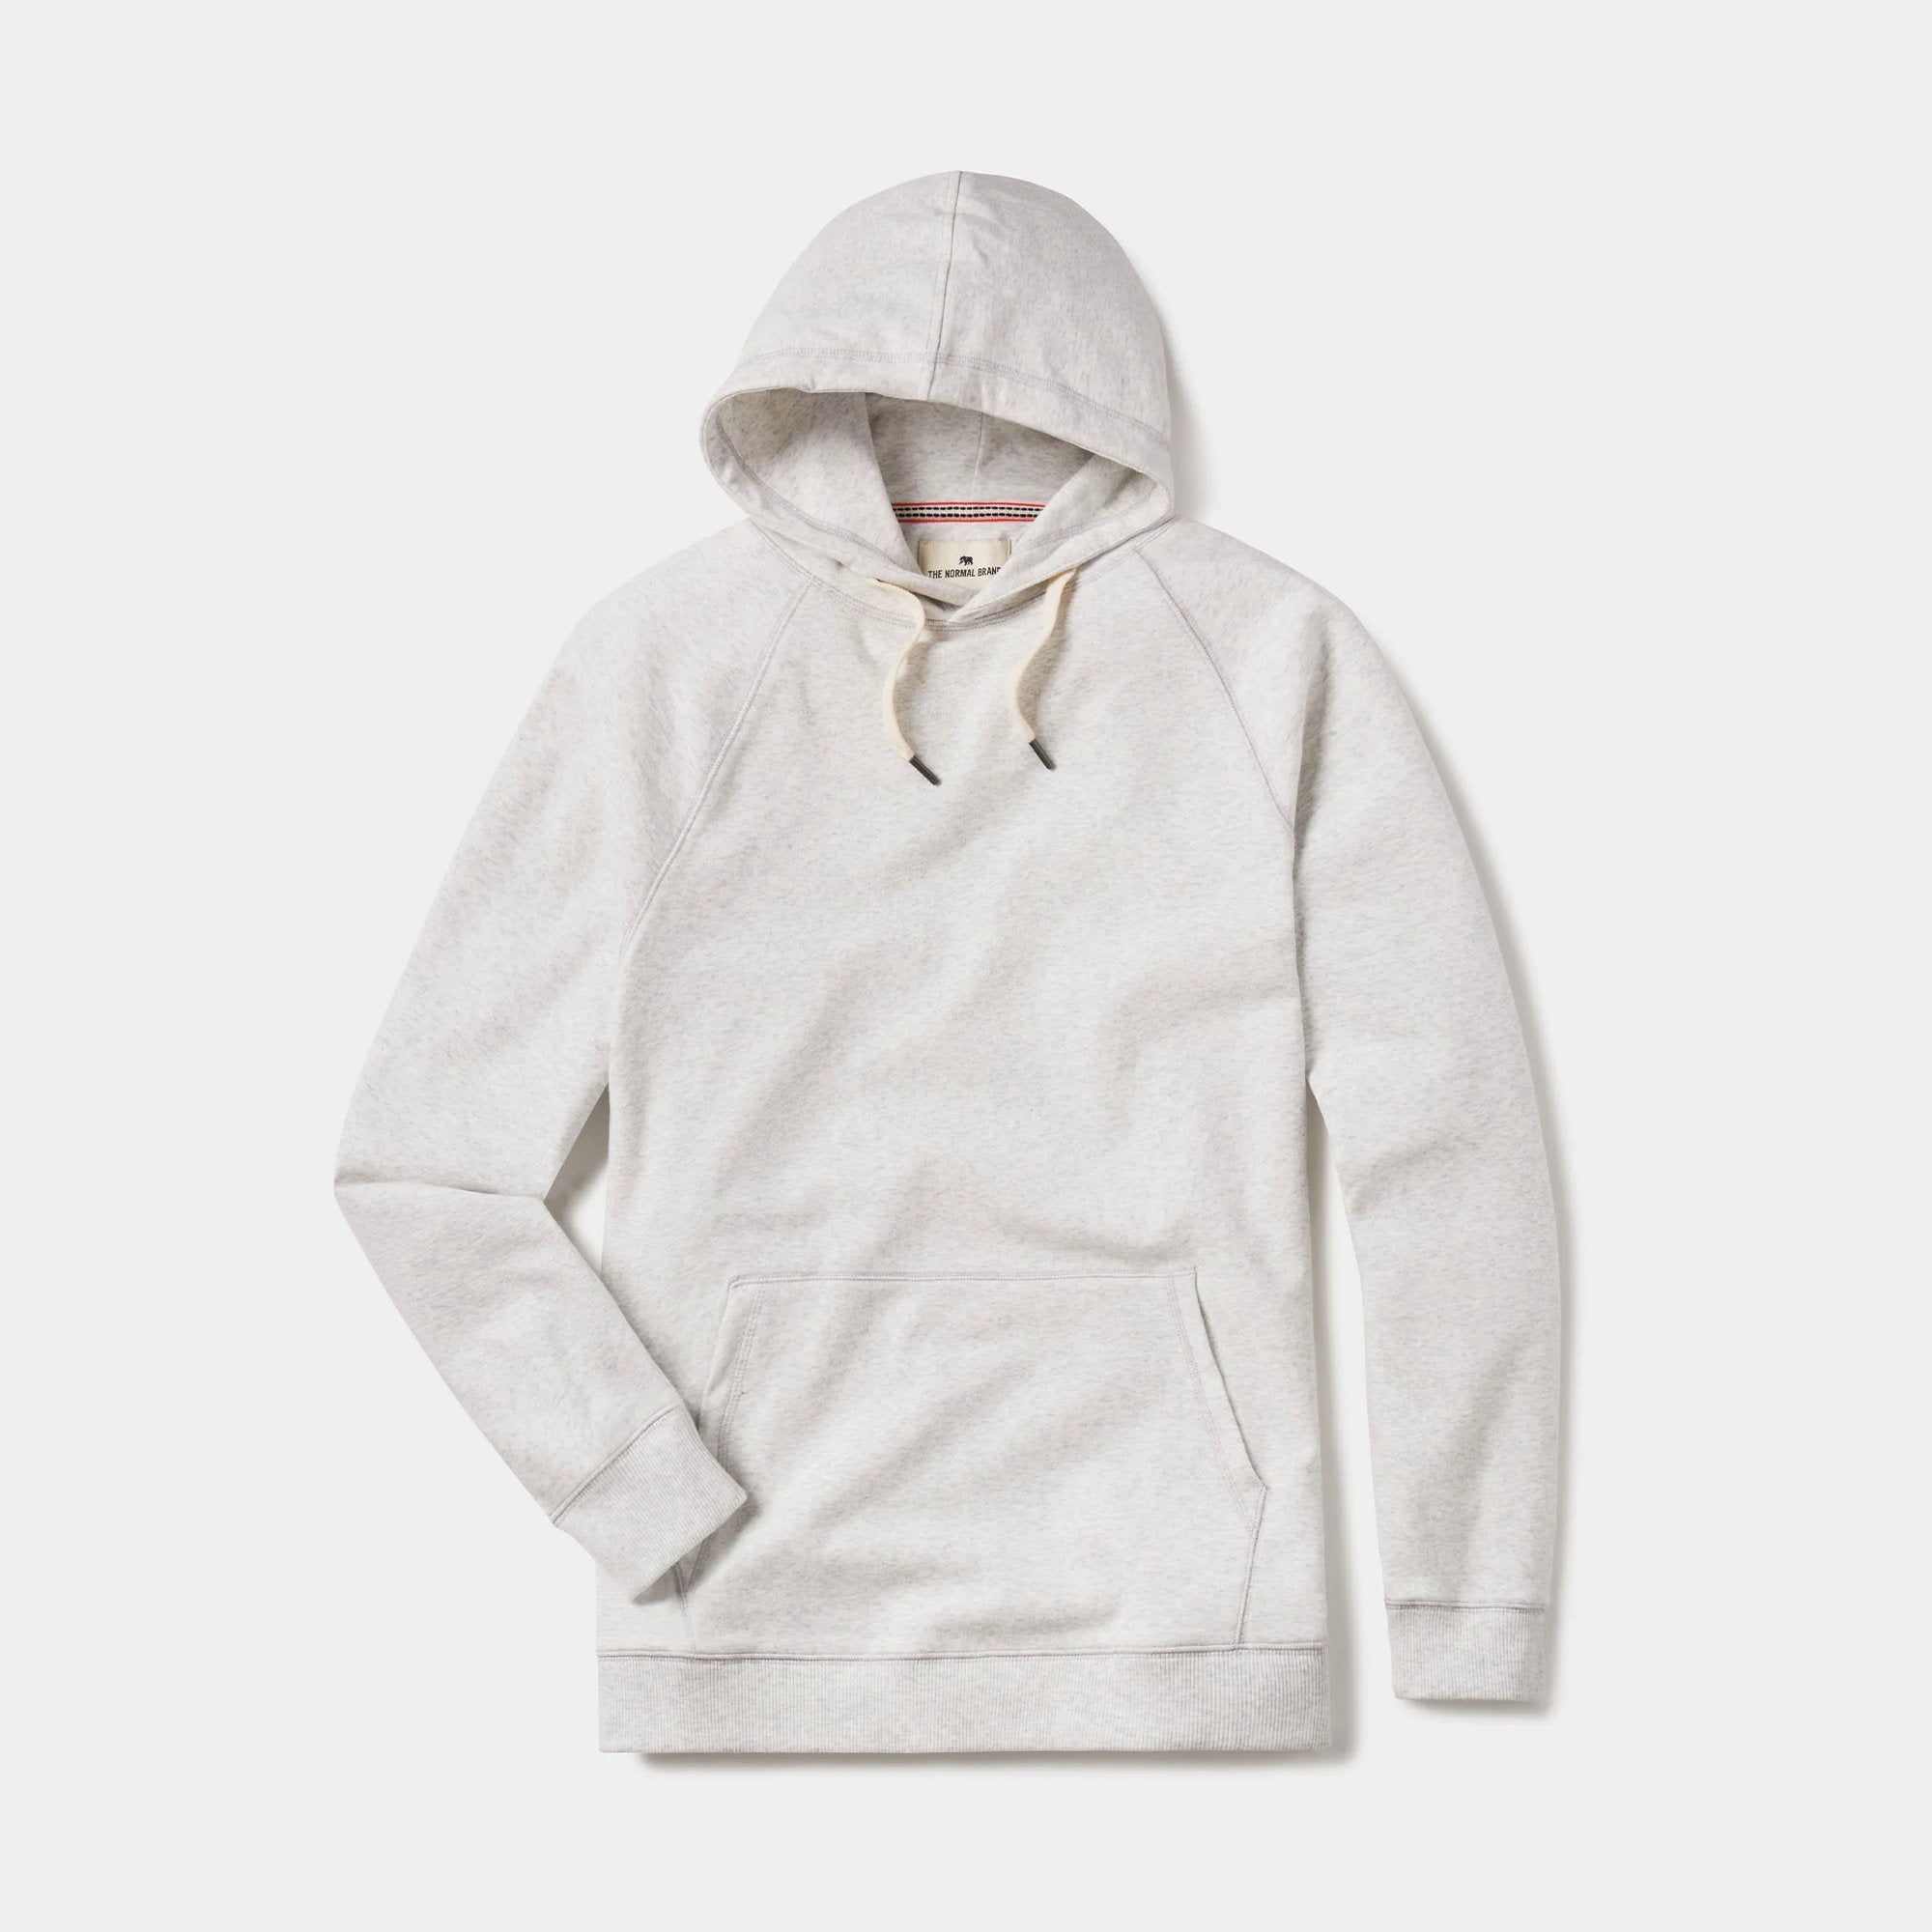 'The Normal Brand Puremeso Weekend Hoodie' in 'Stone' colour